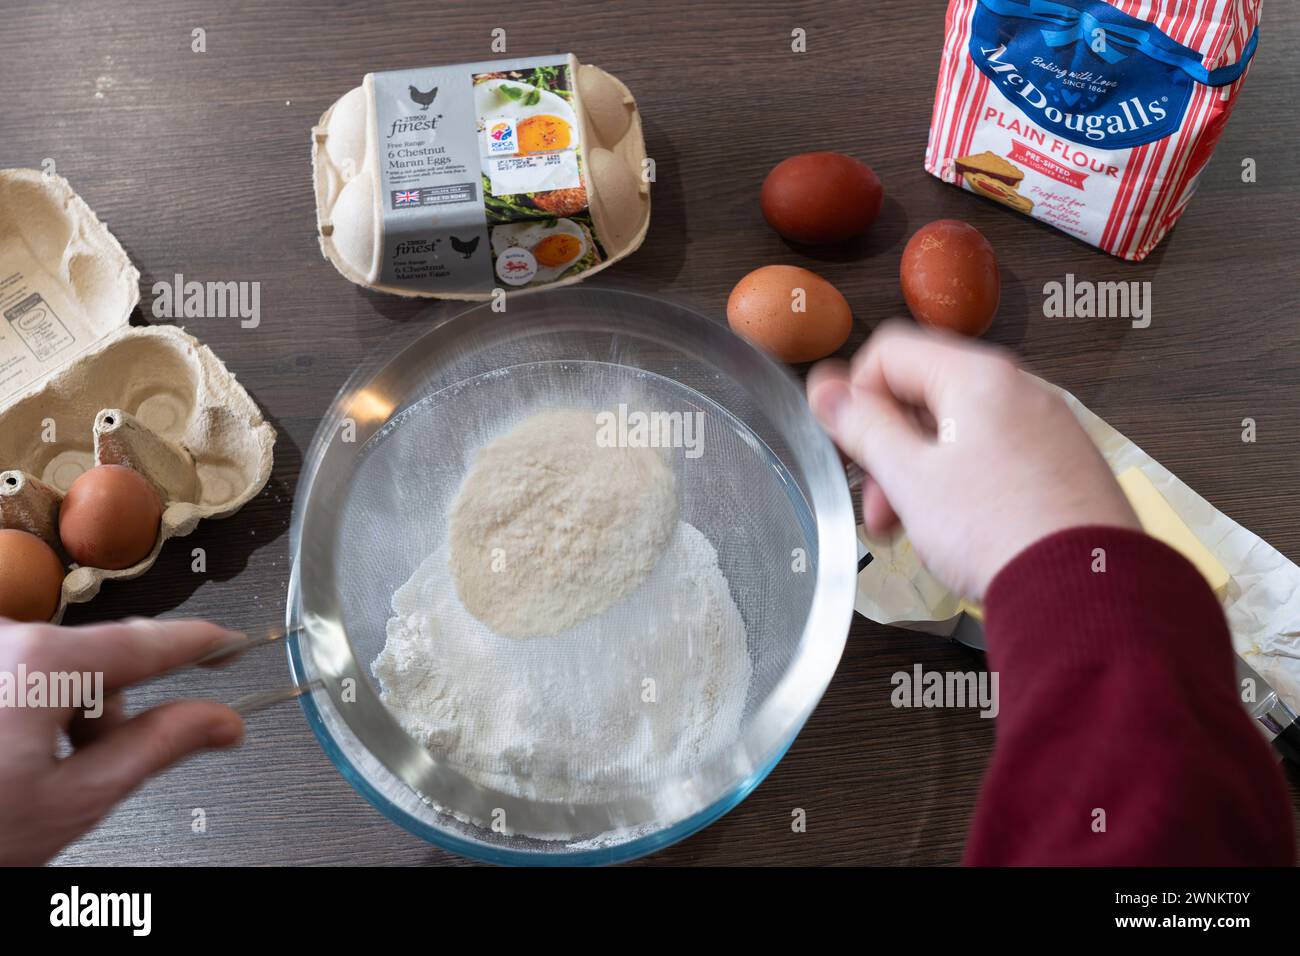 A man's hands holding a sieve and sifting flour, with ingredients for baking a cake on a kitchen worktop - butter, eggs and flour. UK Stock Photo